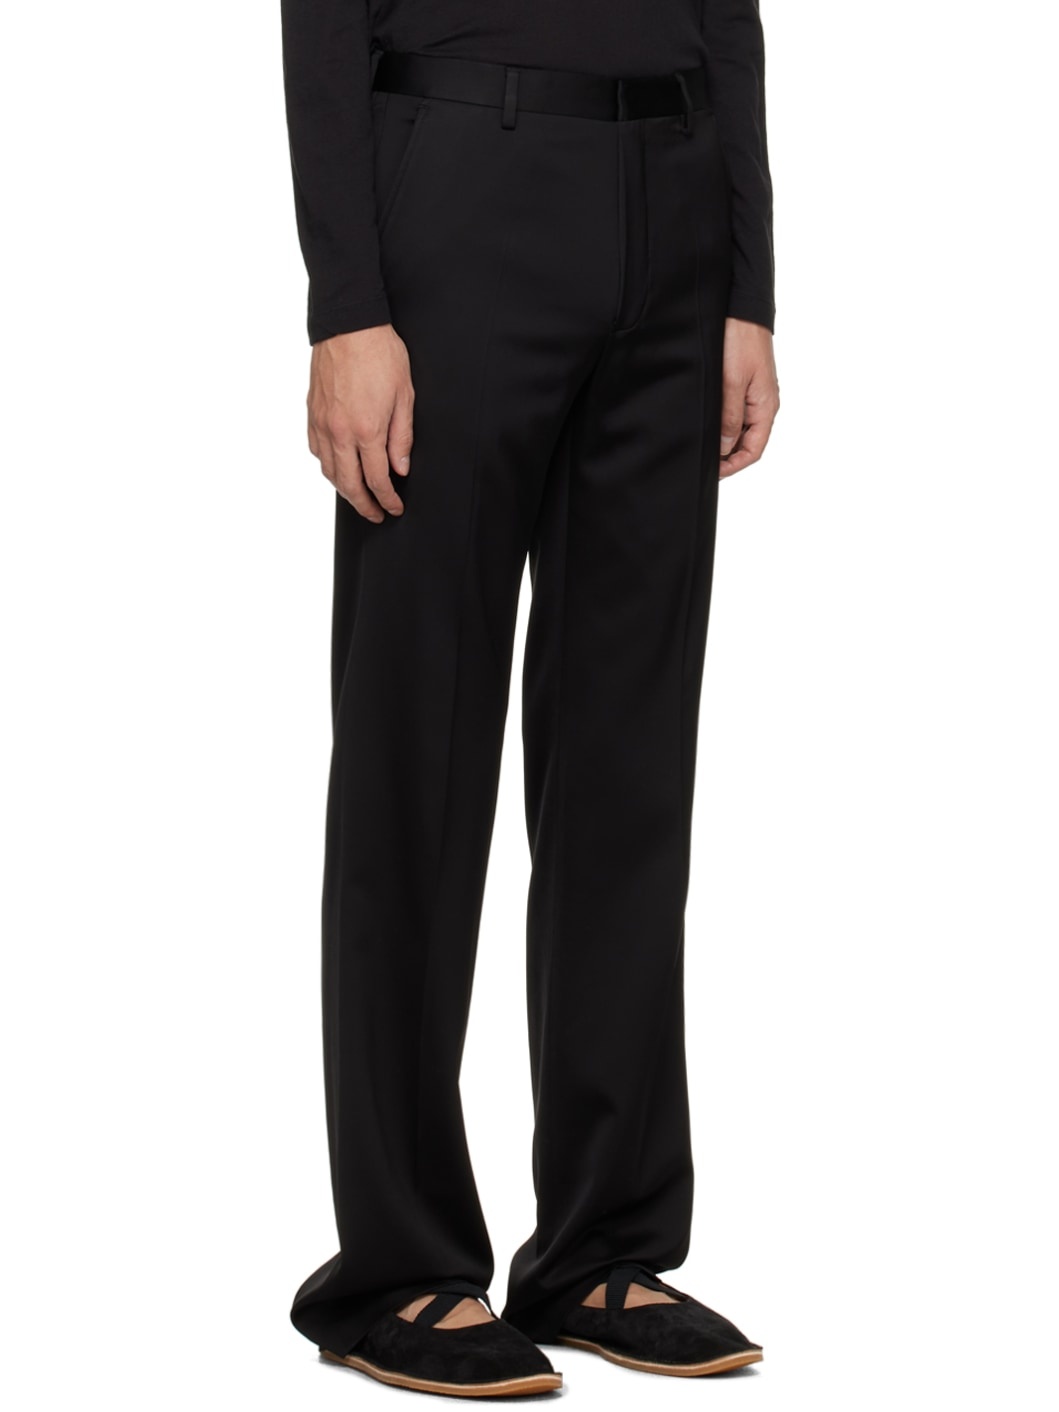 Black Creased Trousers - 2